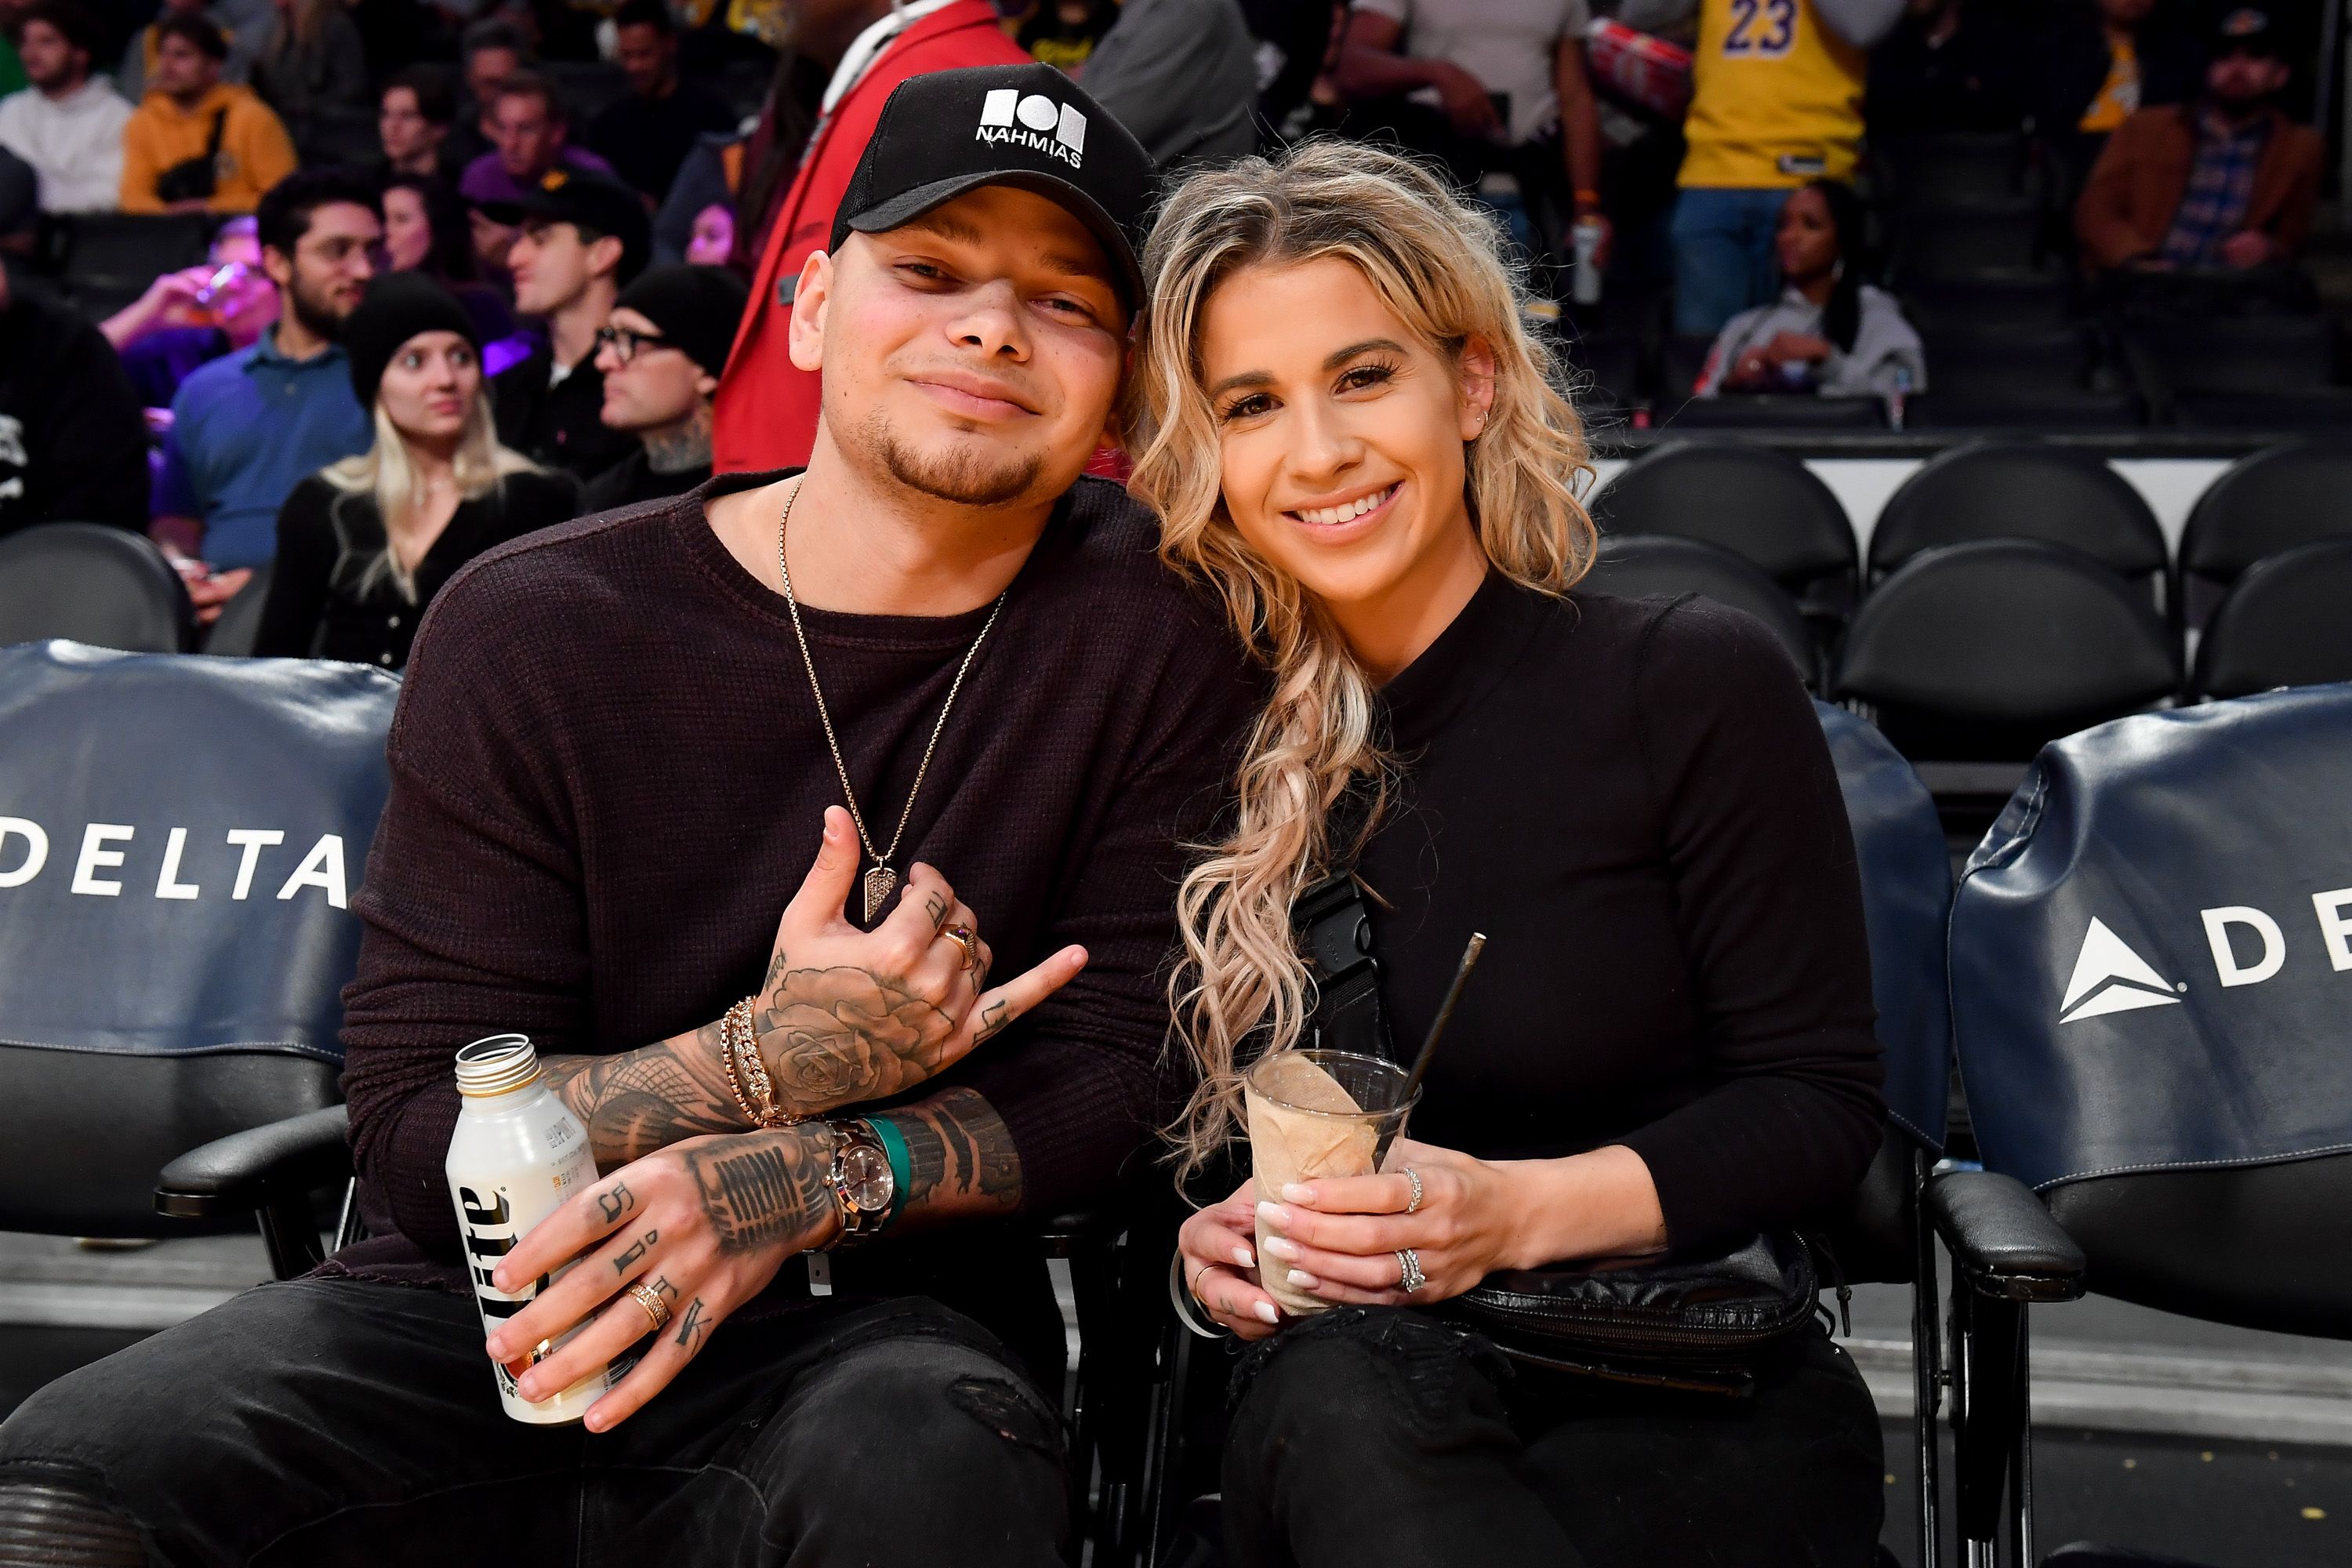 Kane Brown and Katelyn Jae at a basketball game between the Los Angeles Lakers and the New York Knicks in January 2020 in Los Angeles | Source: Getty Images